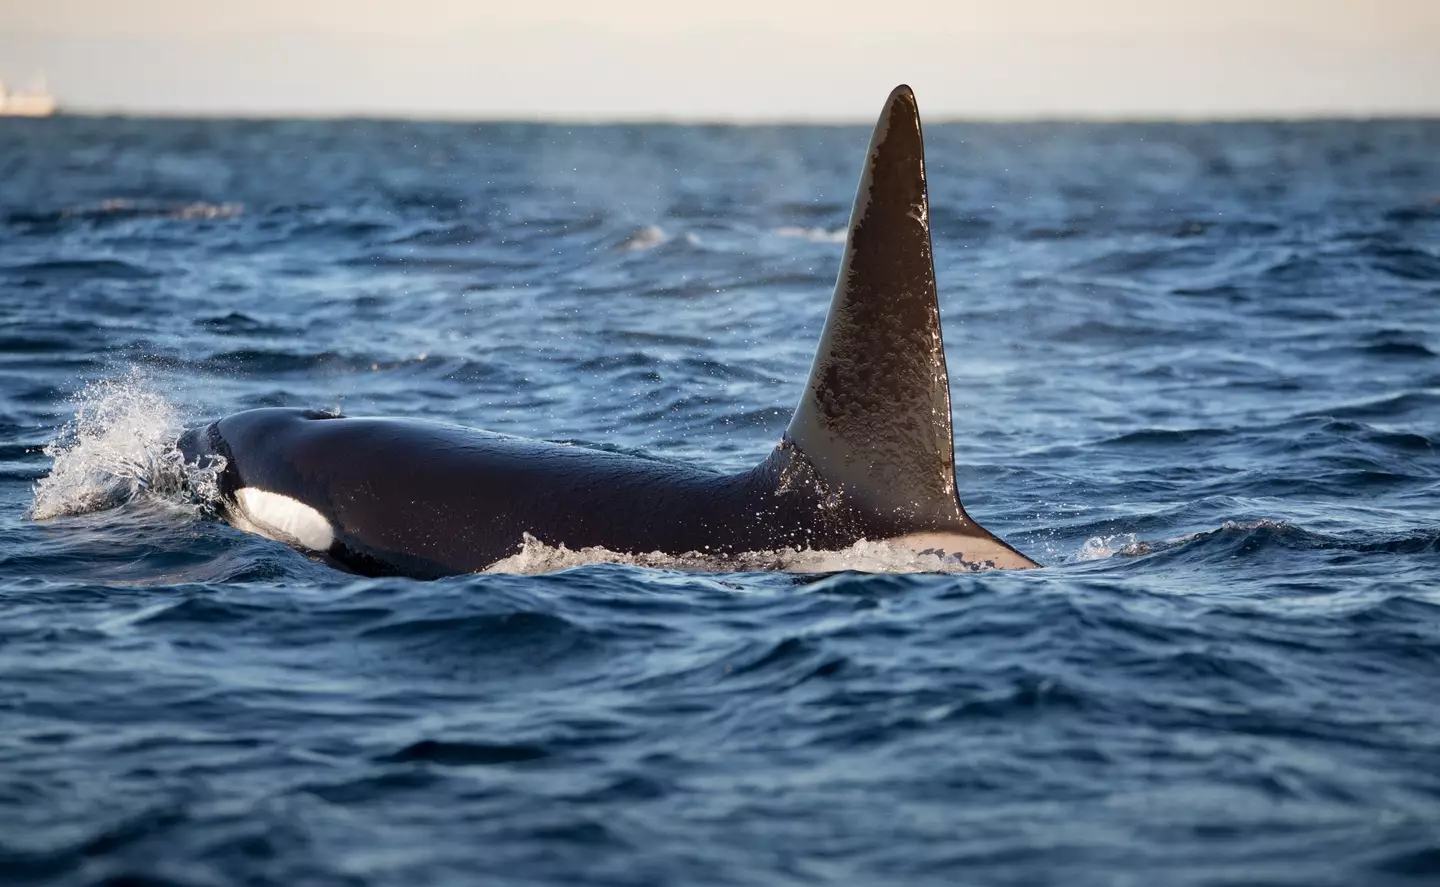 Orcas have been attacking boats in the Mediterranean for a while now.